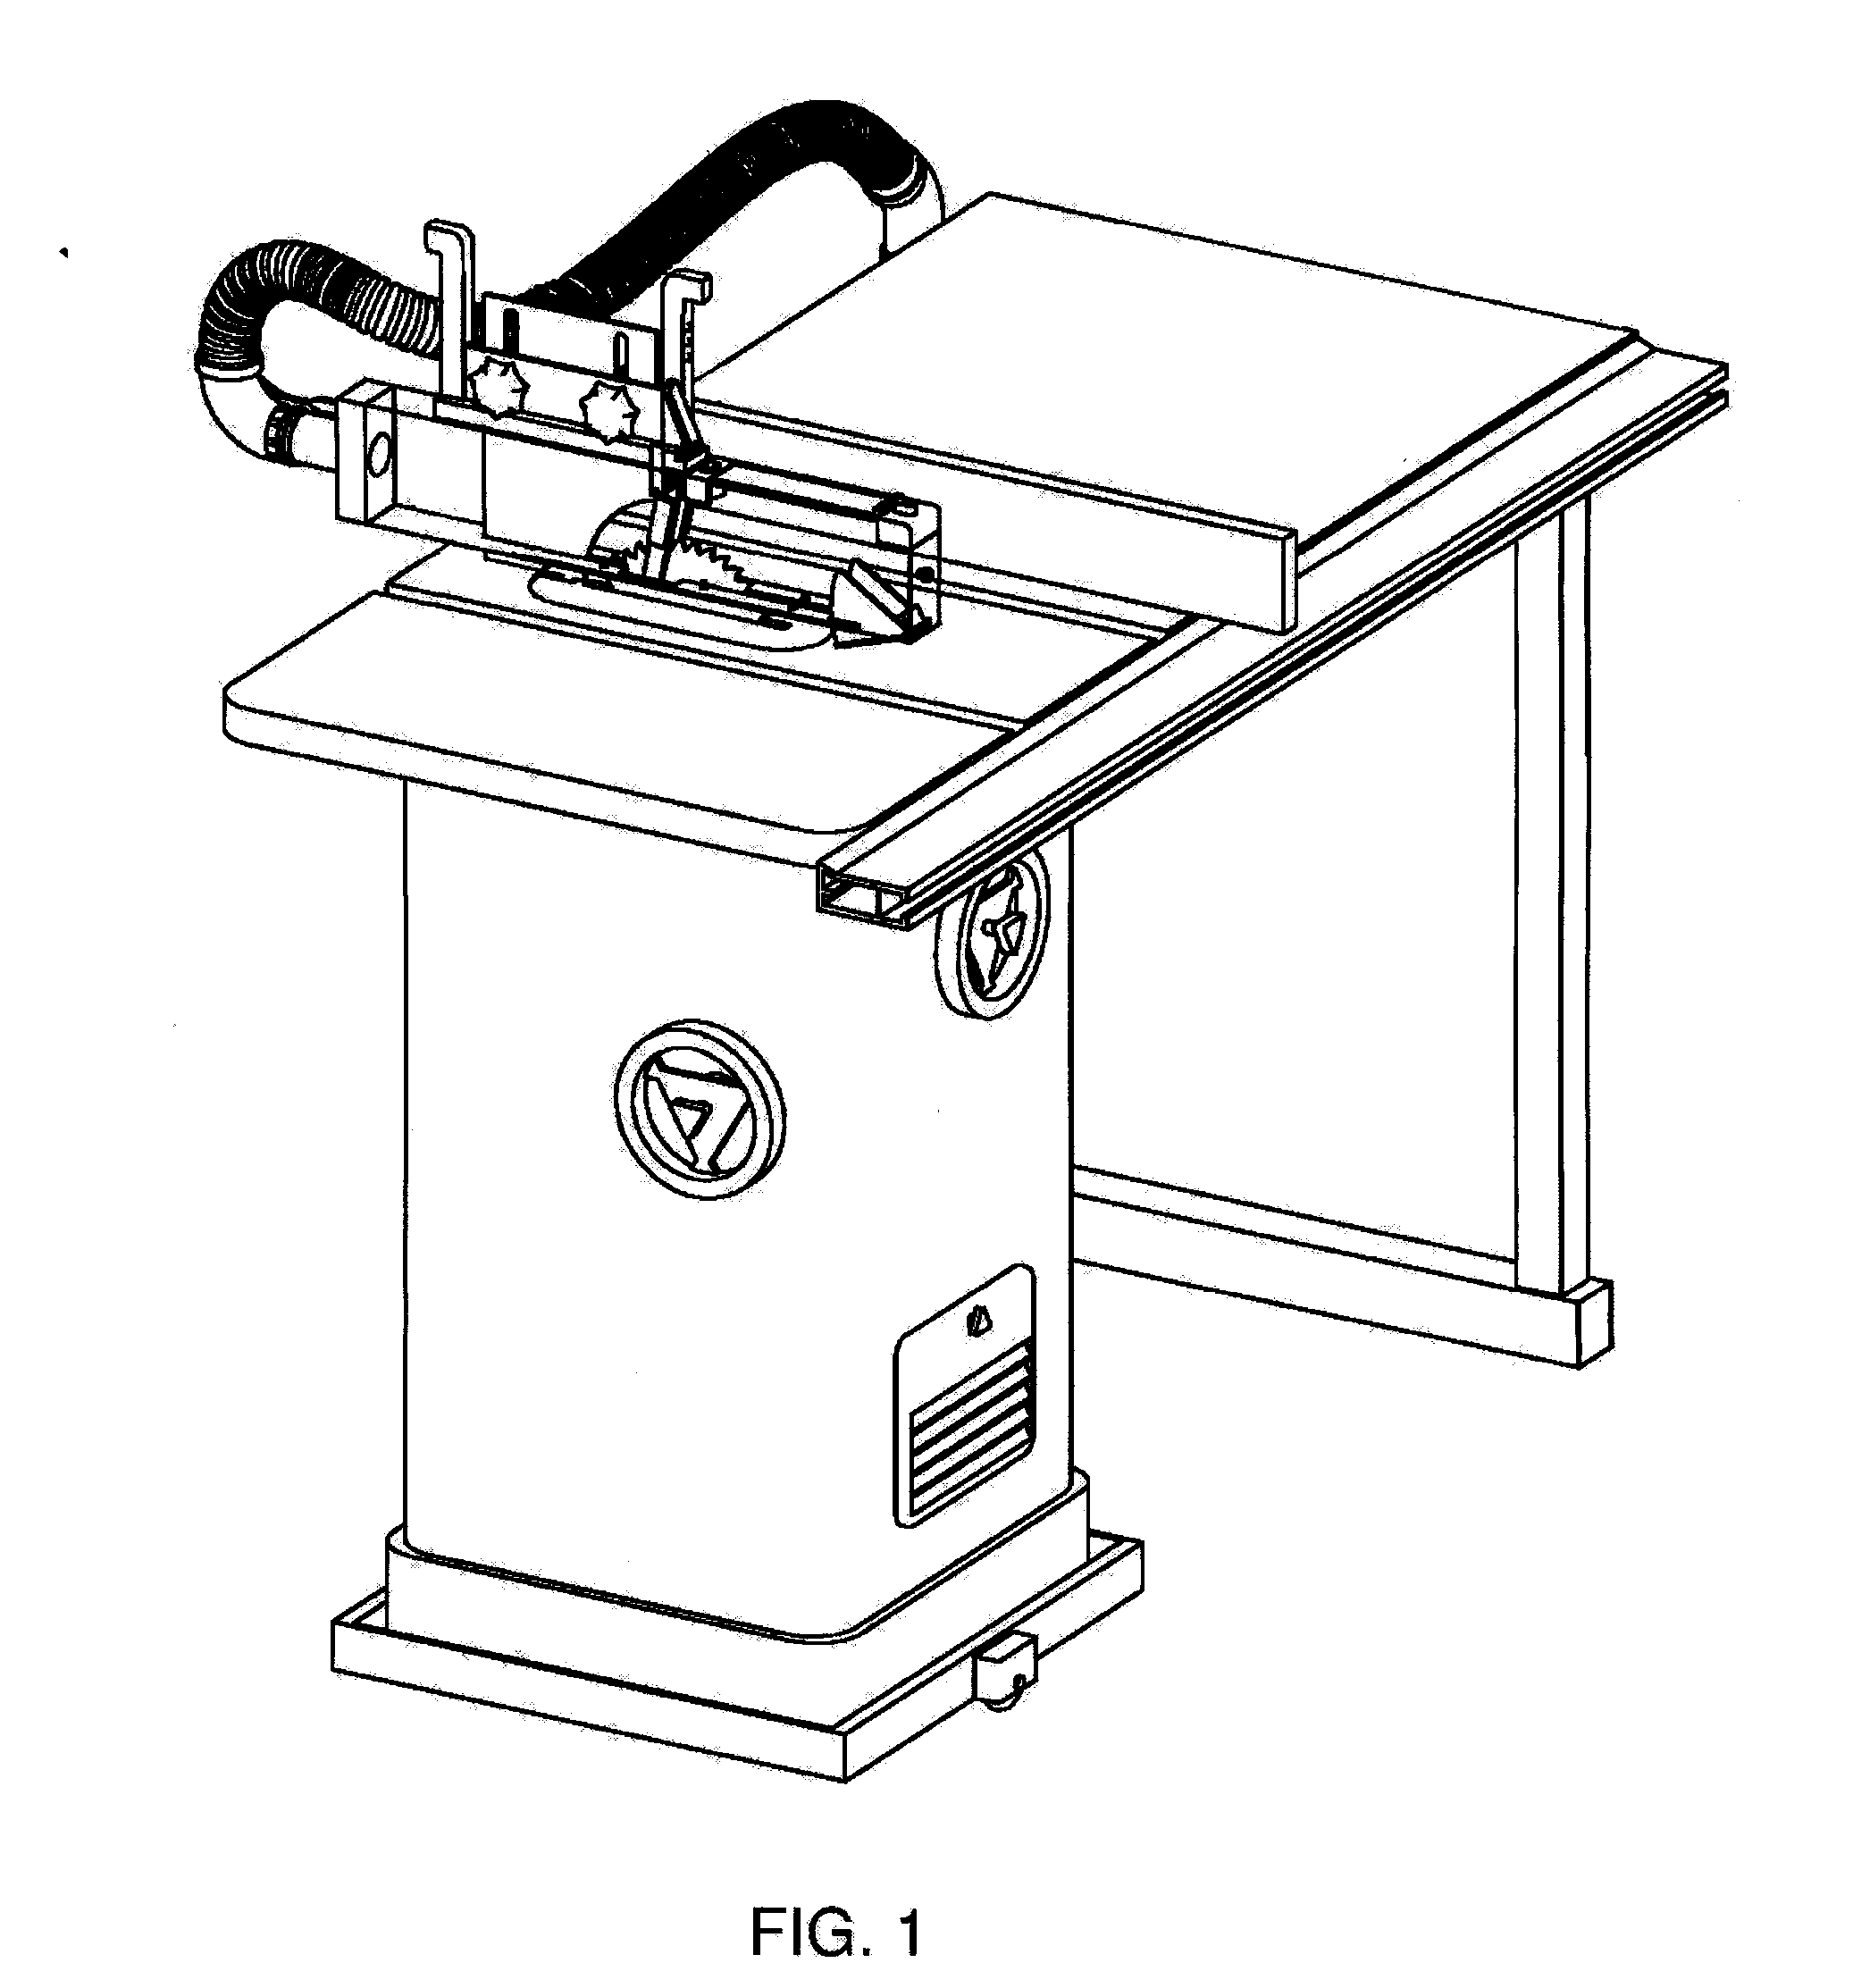 Health and safety system for a table saw